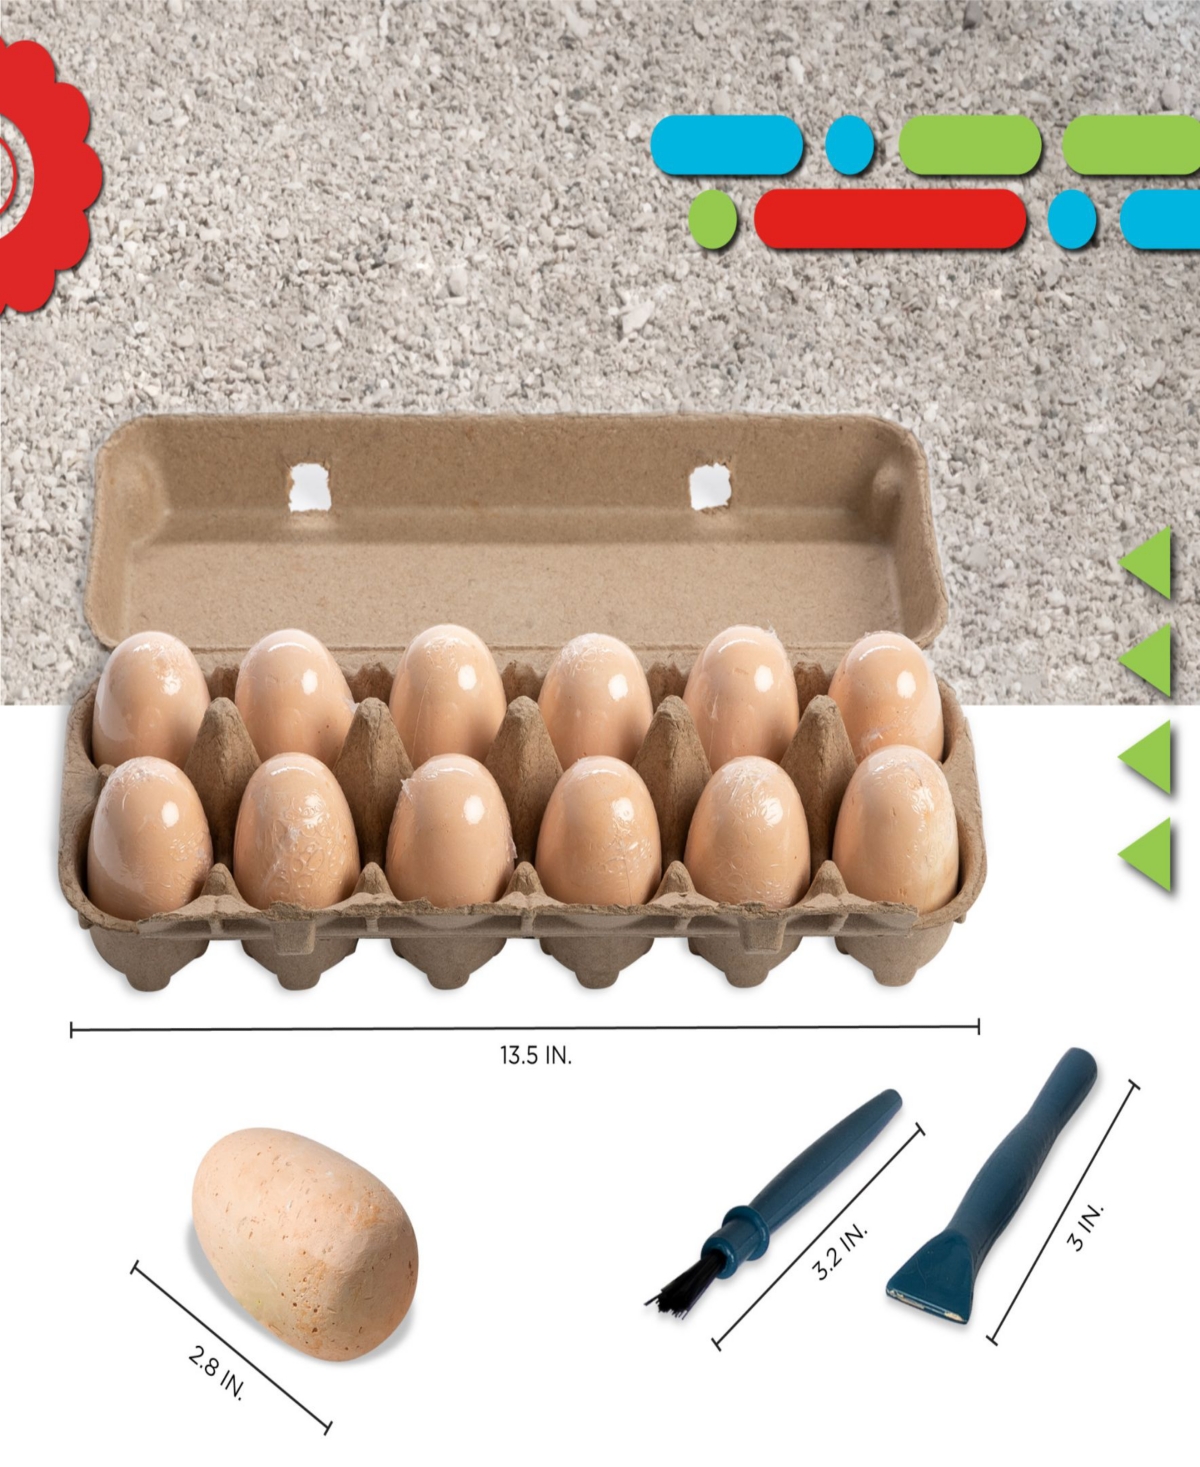 Shop Discovery Dig And Discover Dino Excavation Eggs In Beige,khaki